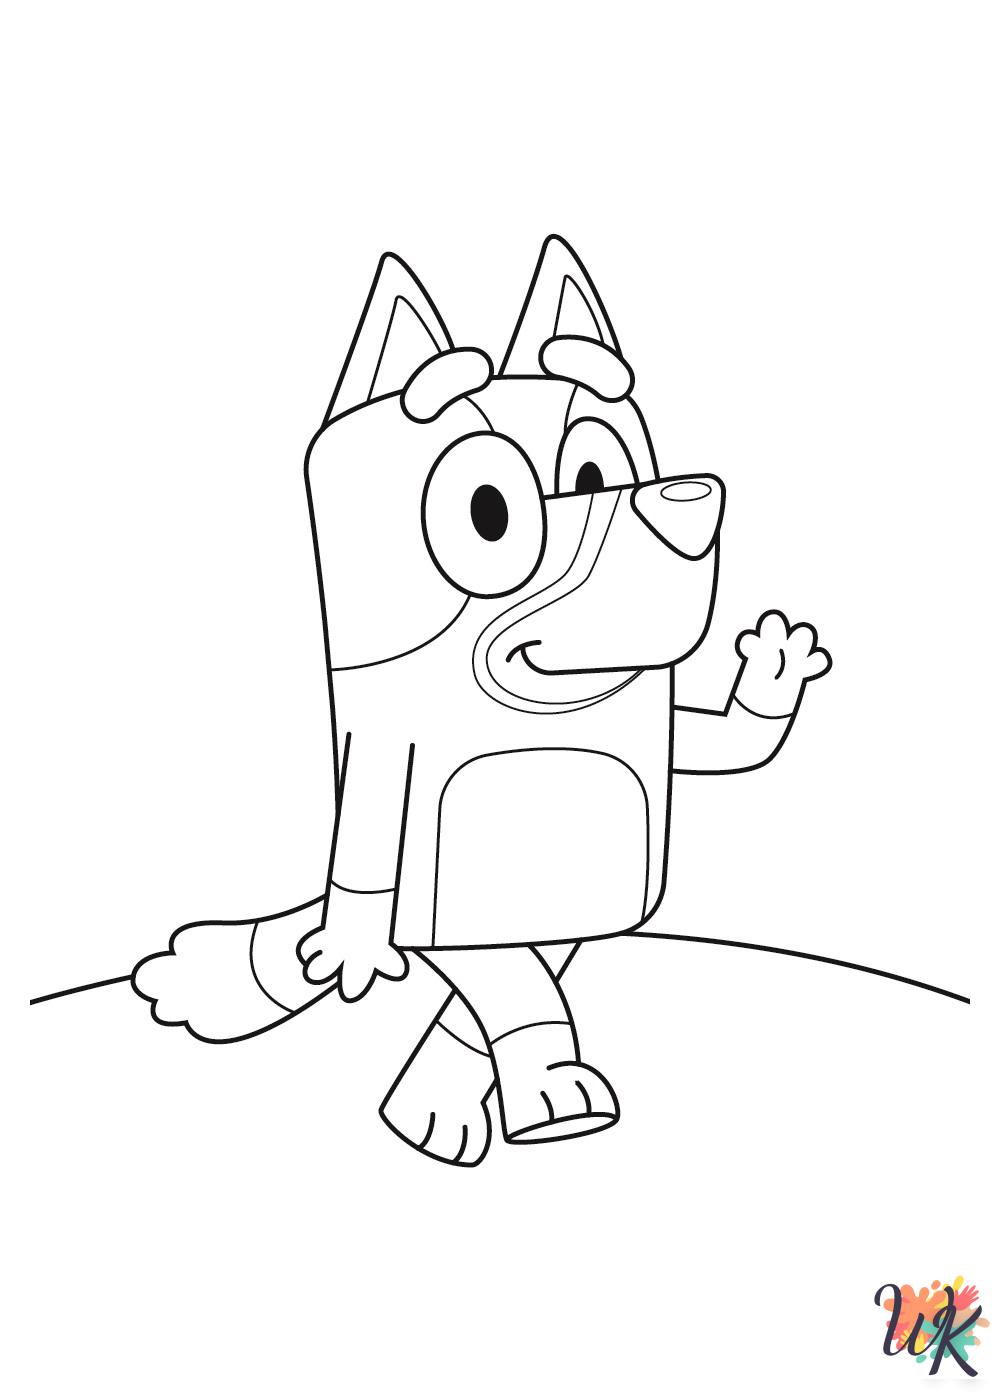 Bluey coloring pages pdf